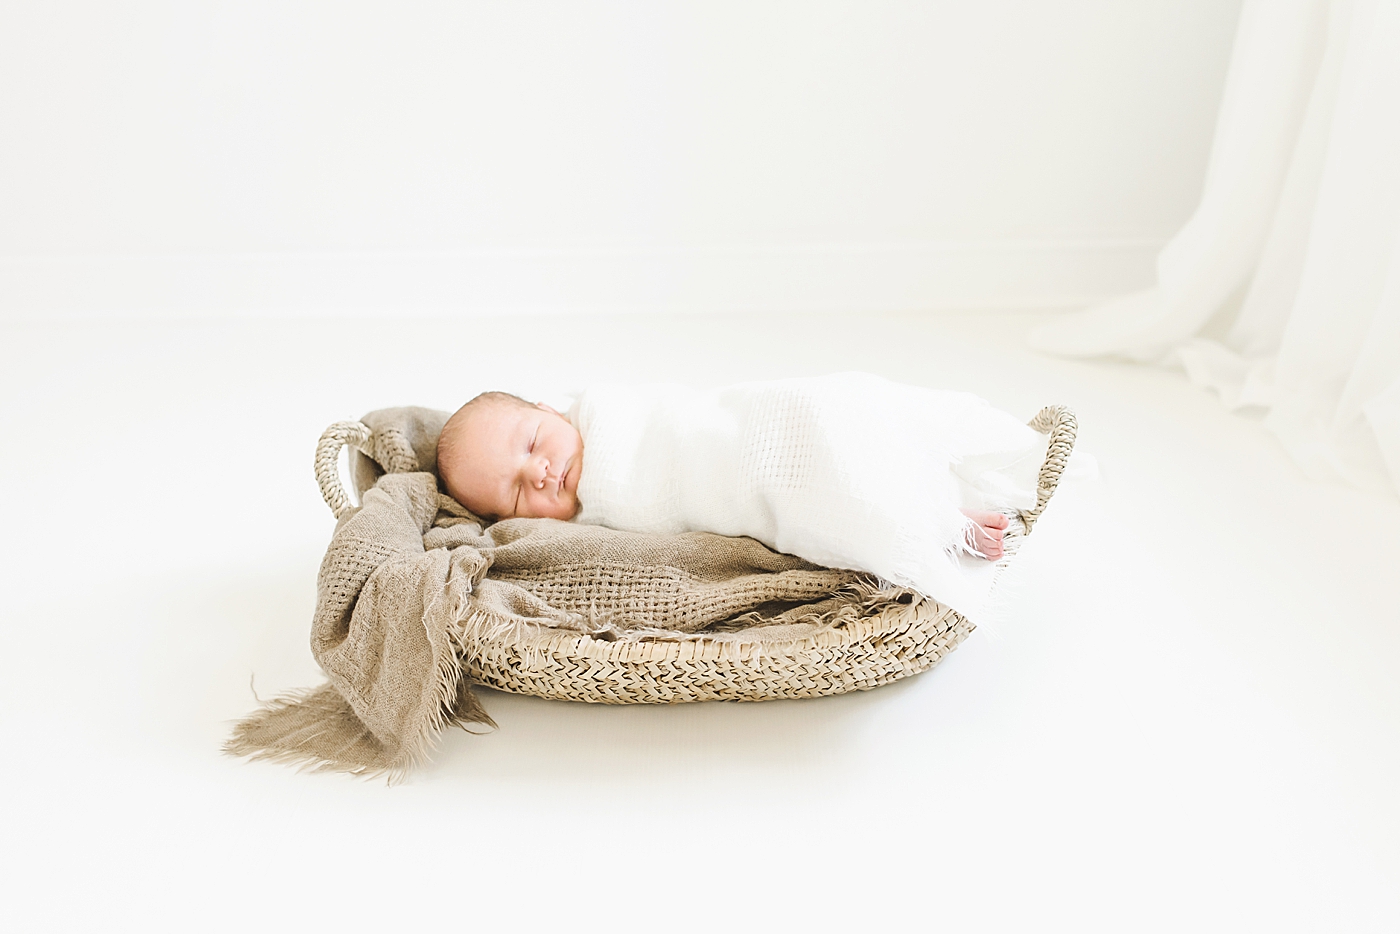 Newborn baby sleeping wrapped in swaddle | Photo by Anna Wisjo Photography